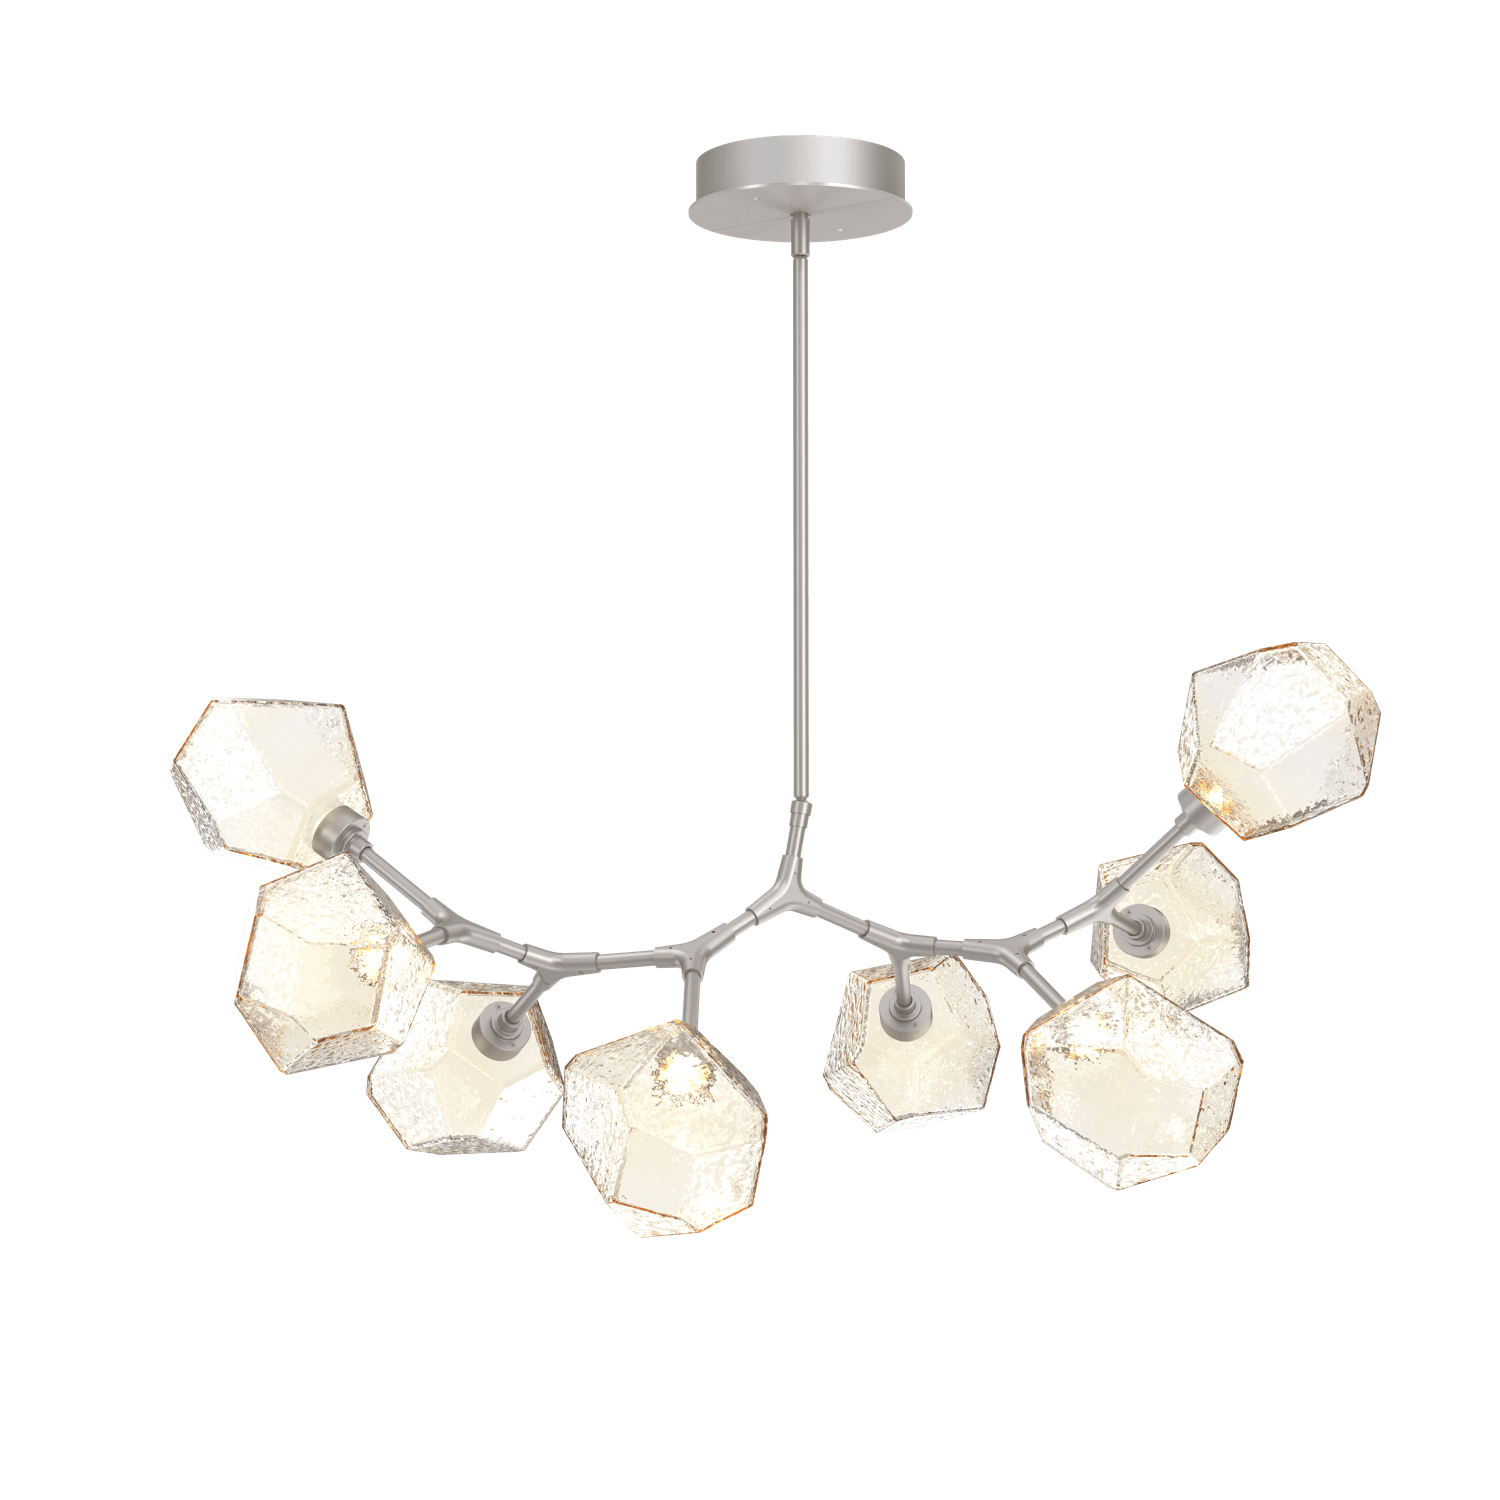 PLB0039-BB-BS-A-Hammerton-Studio-Gem-8-light-modern-branch-chandelier-with-metallic-beige-silver-finish-and-amber-blown-glass-shades-and-LED-lamping